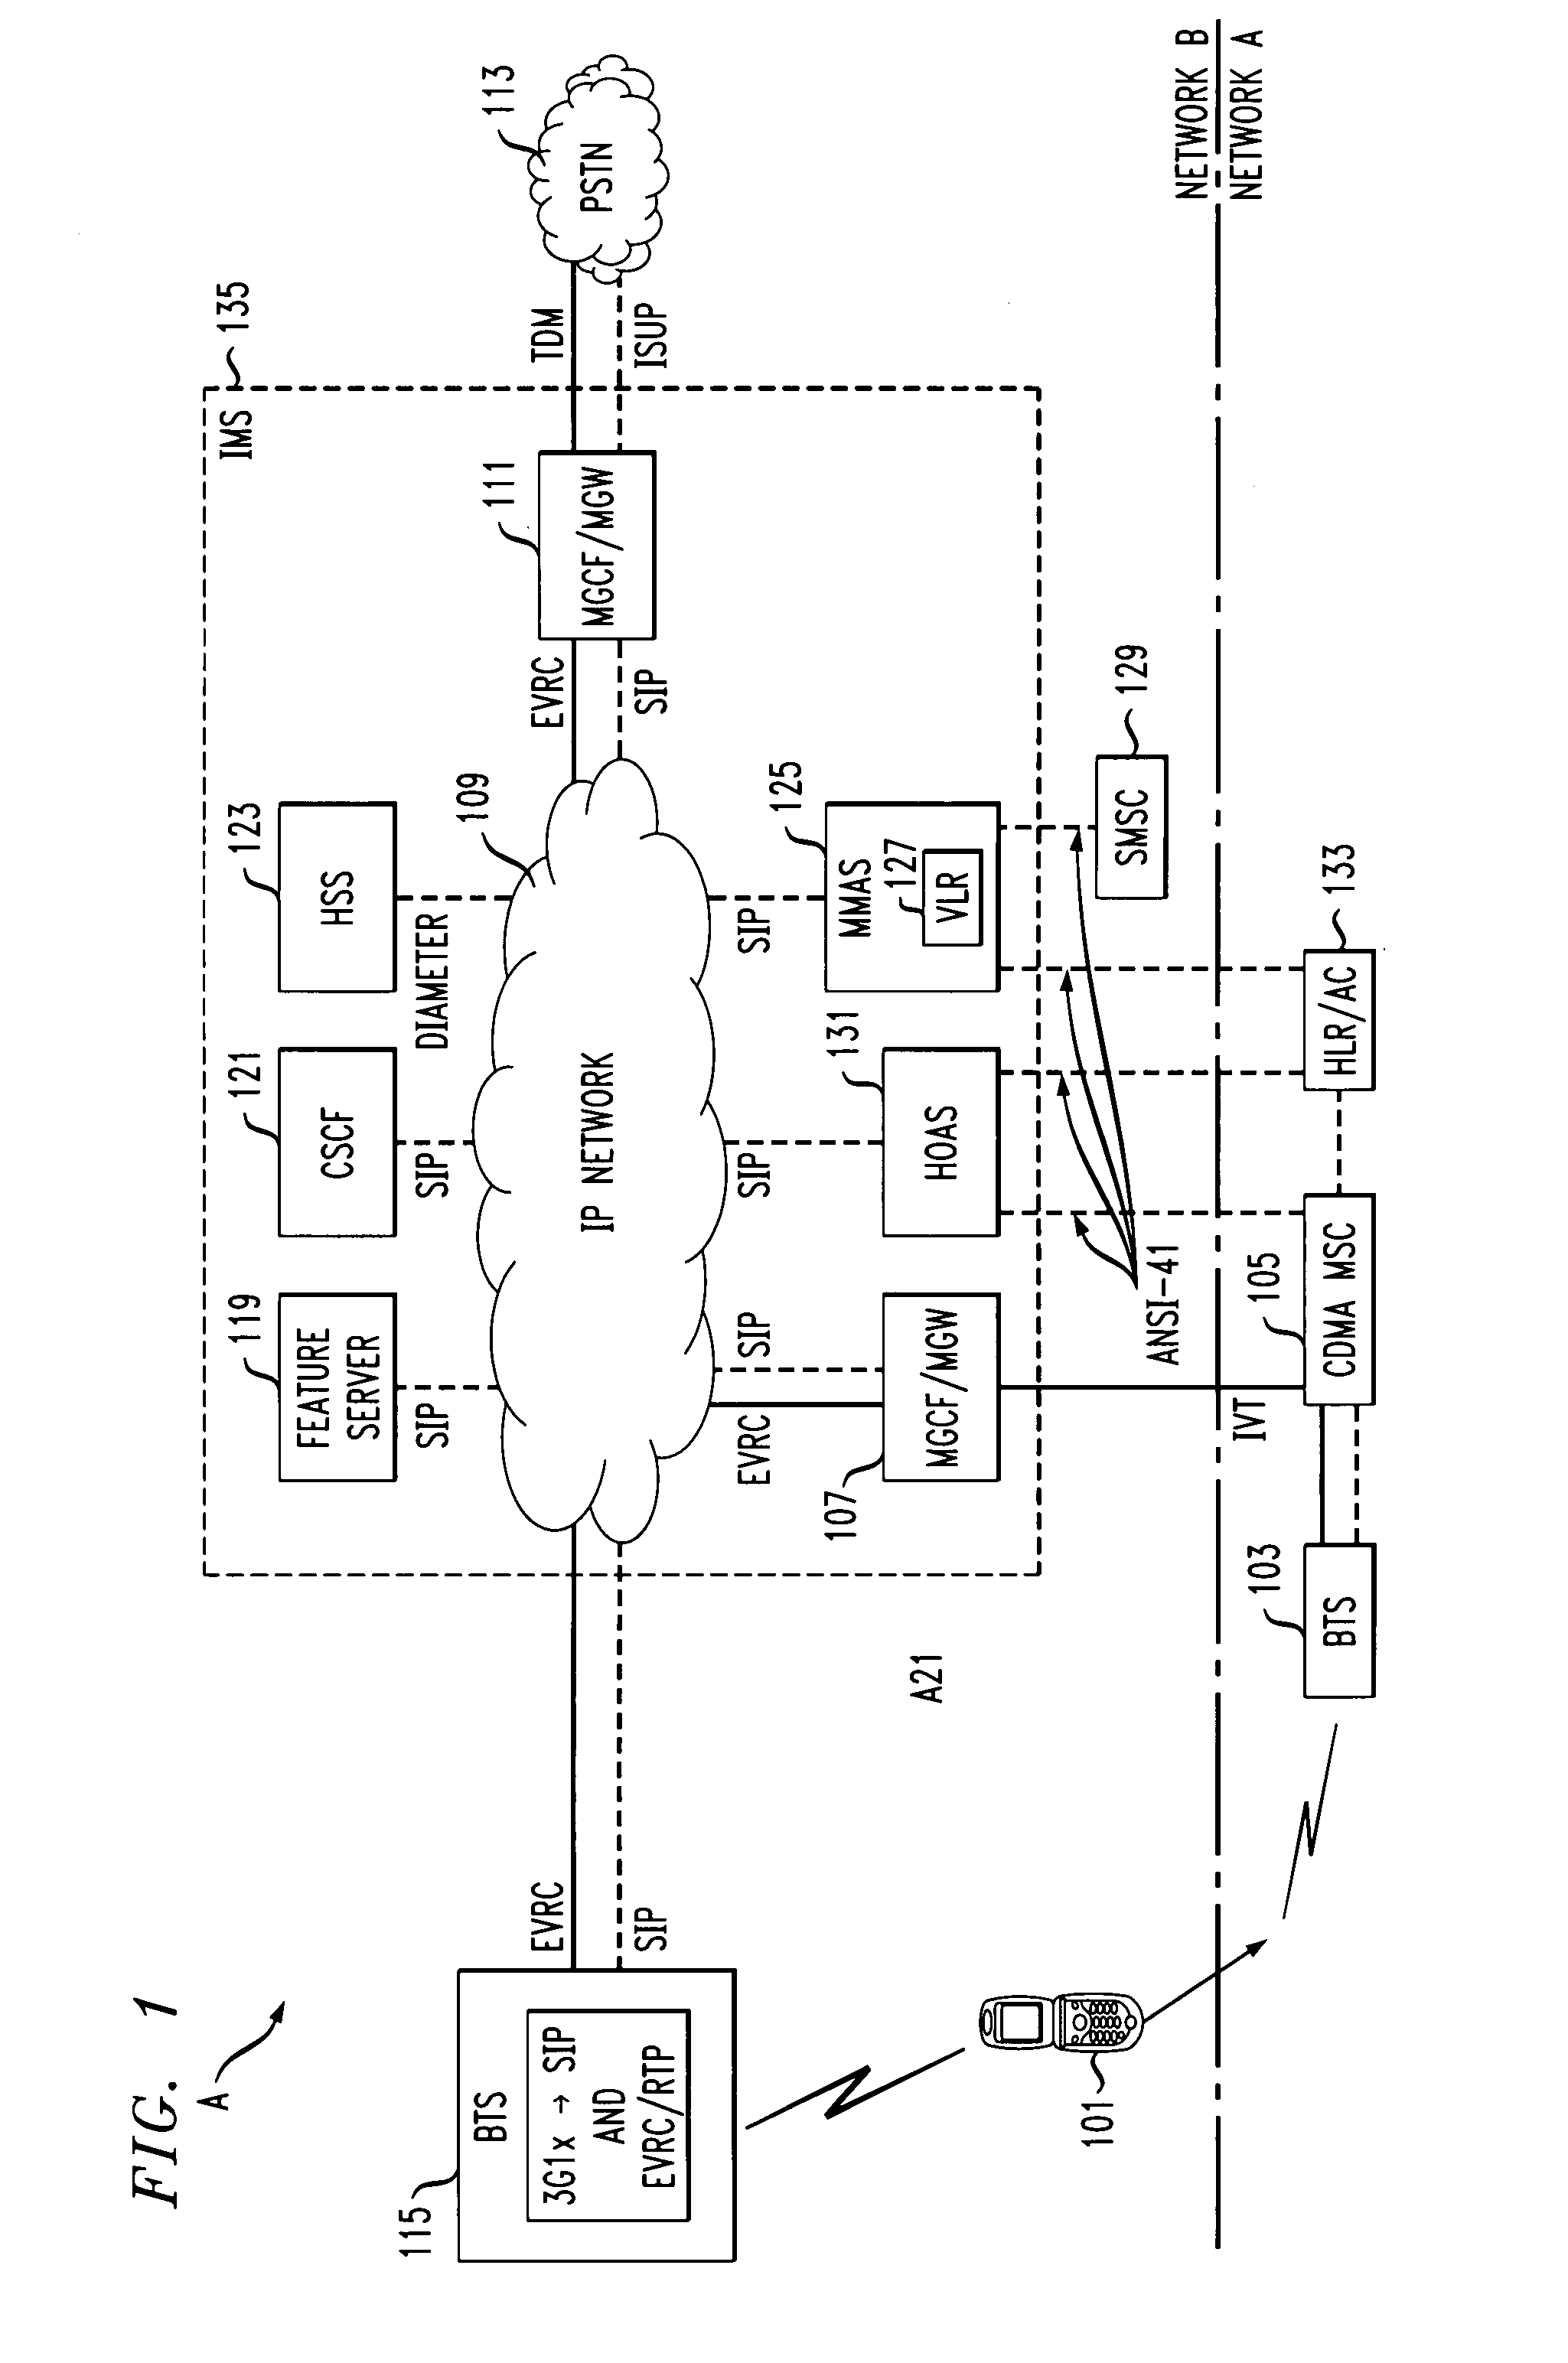 Method to allow hand-off of a CDMA mobile from IMS femtocell to circuit msc